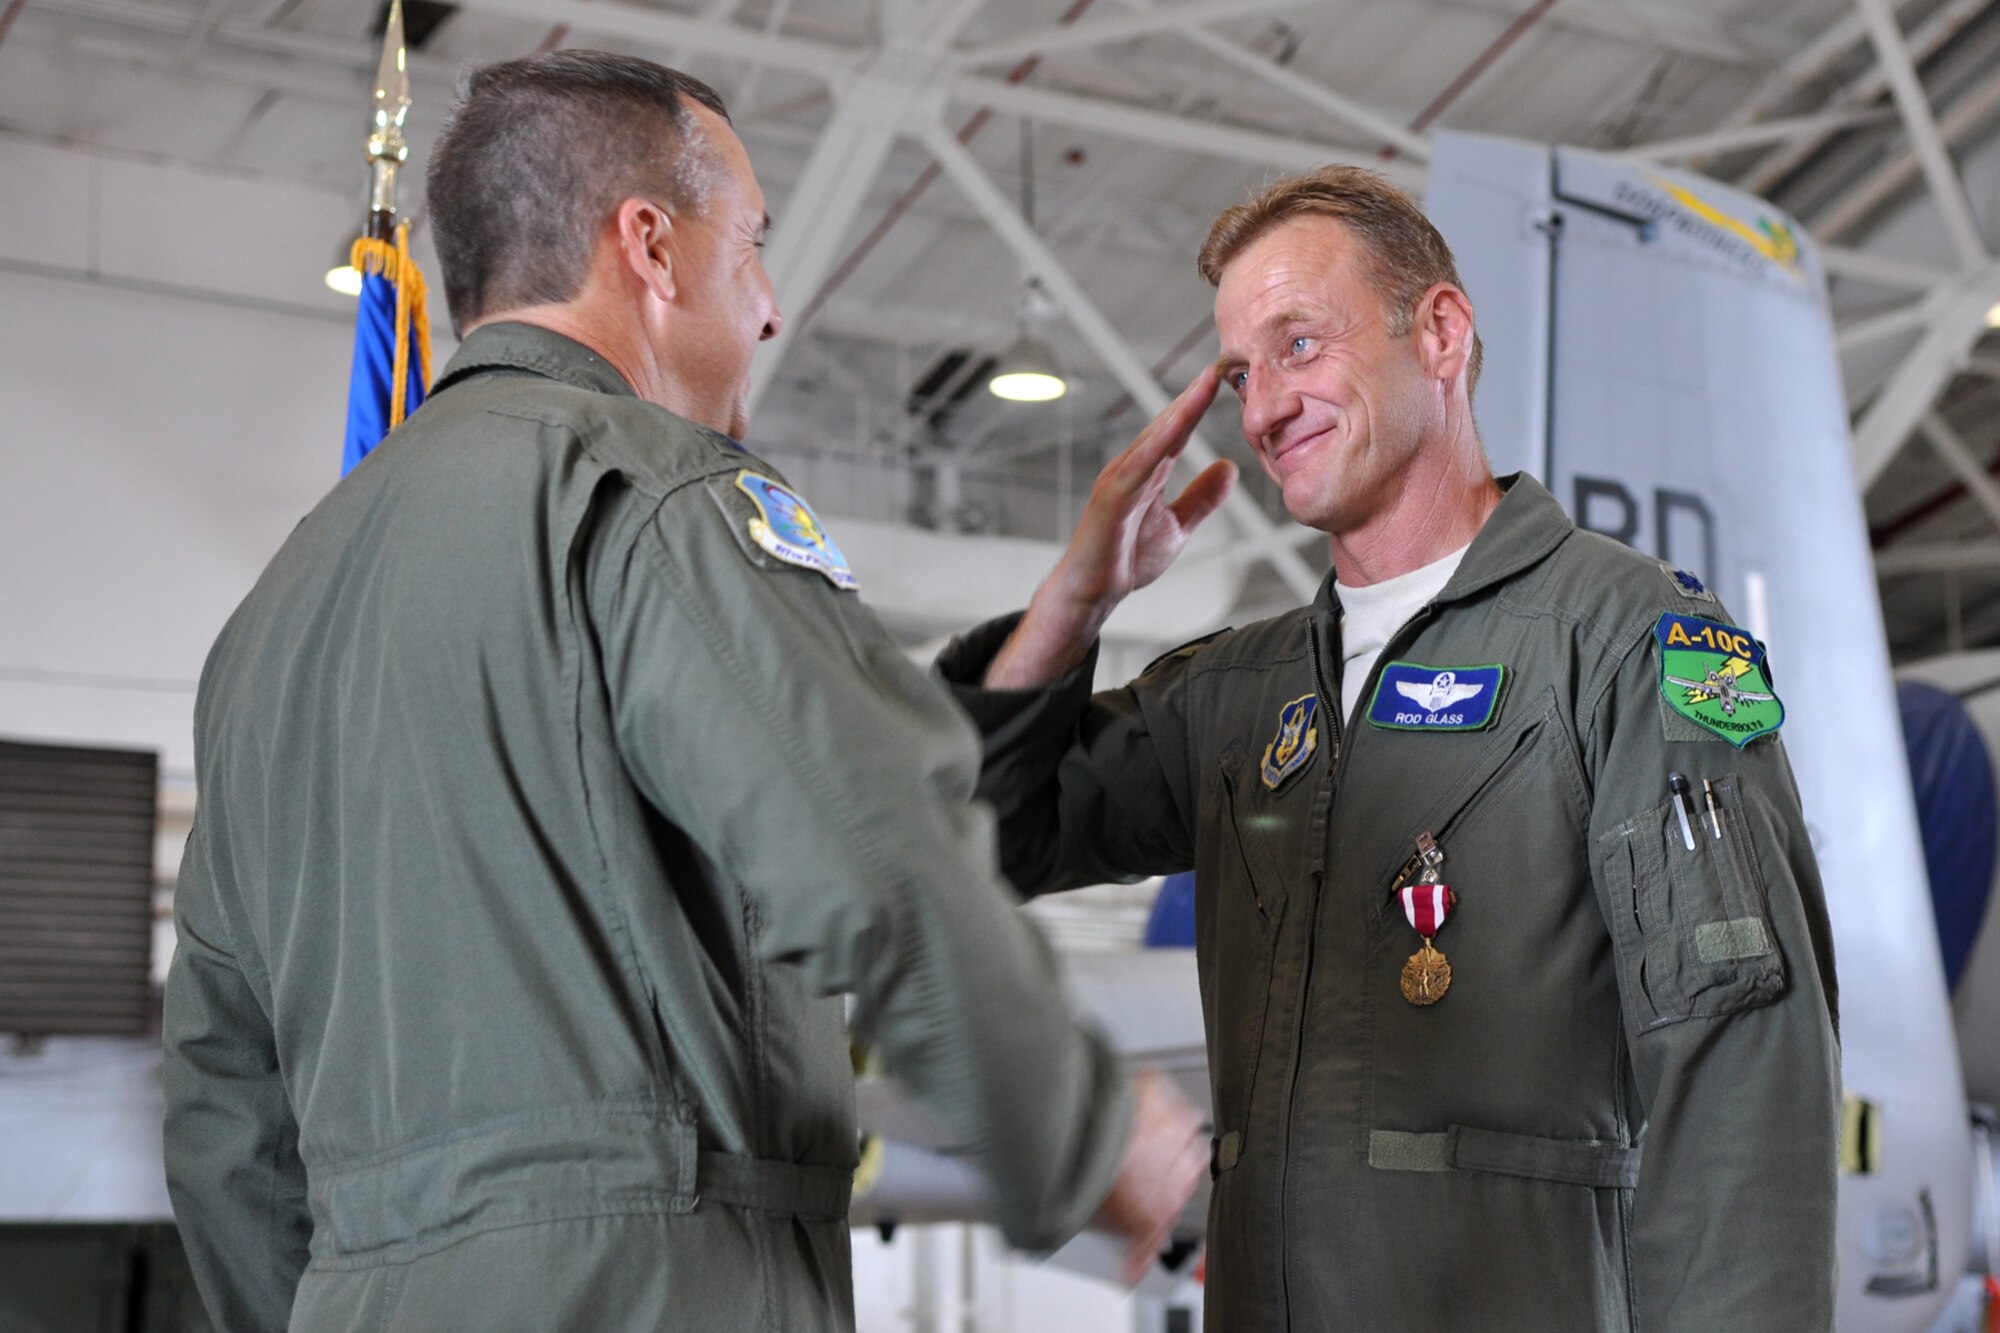 U.S. Air Force Lt. Col. Rodney Glass, the 917th Fighter Group deputy commander, salutes Col. John Breazeale, commander, 917th FG, after being awarded the Meritorious Service Medal at Barksdale Air Force Base, La., Nov. 3, 2012. Glass, who has more than 4,000 flying hours, was retiring after 28 years of service to his country. (U.S. Air Force photo by Master Sgt. Jeff Walston/Released)